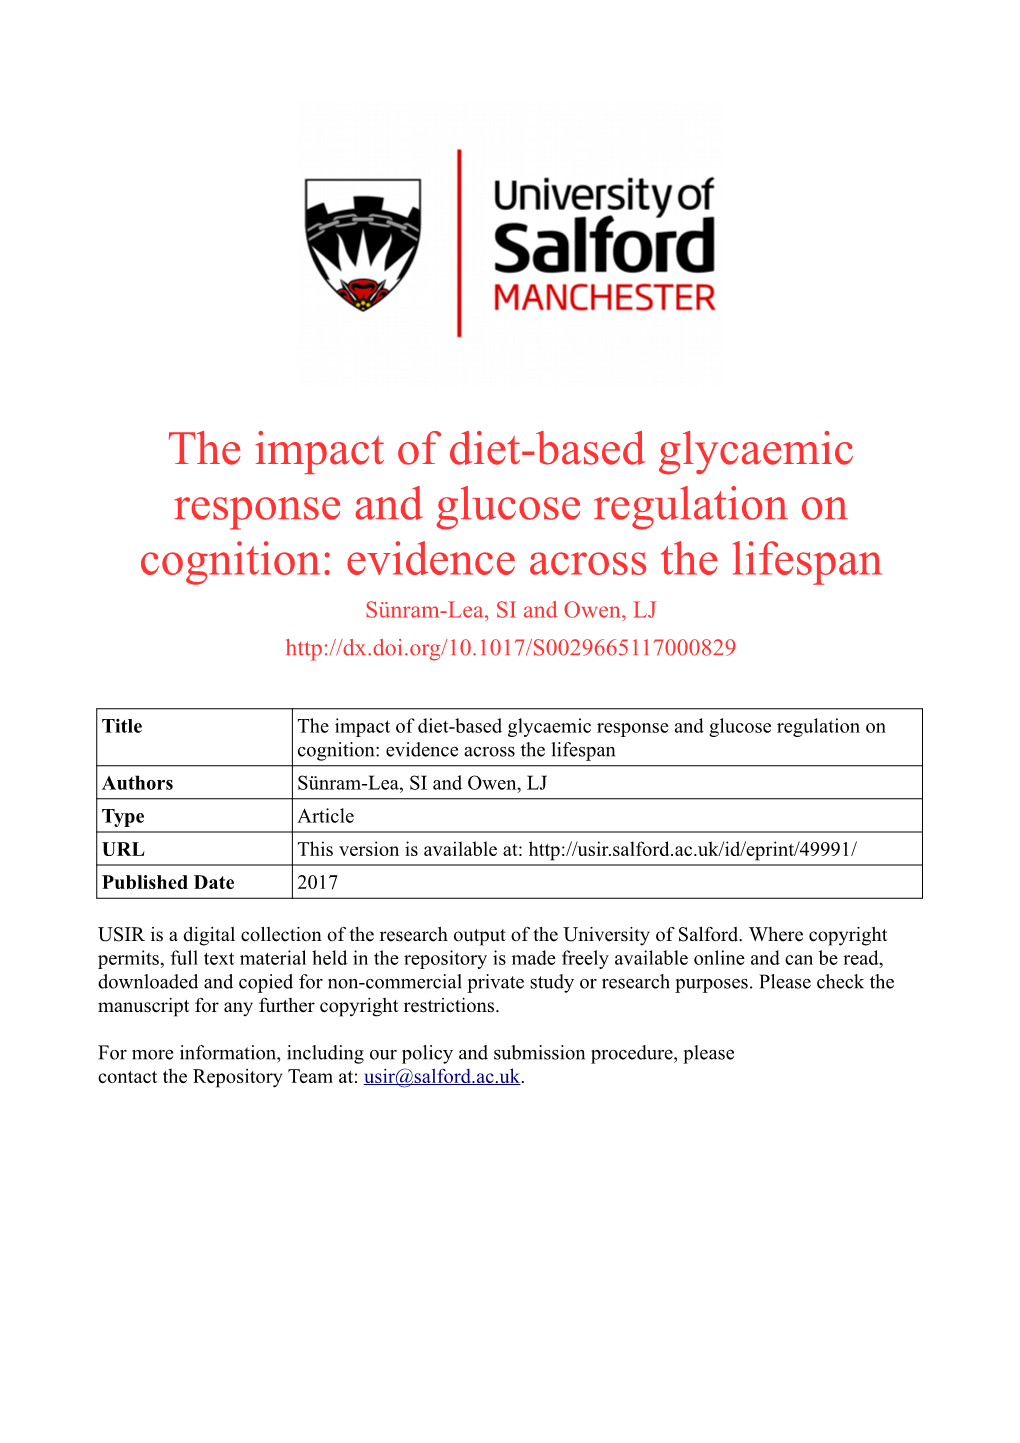 The Impact of Dietbased Glycaemic Response and Glucose Regulation